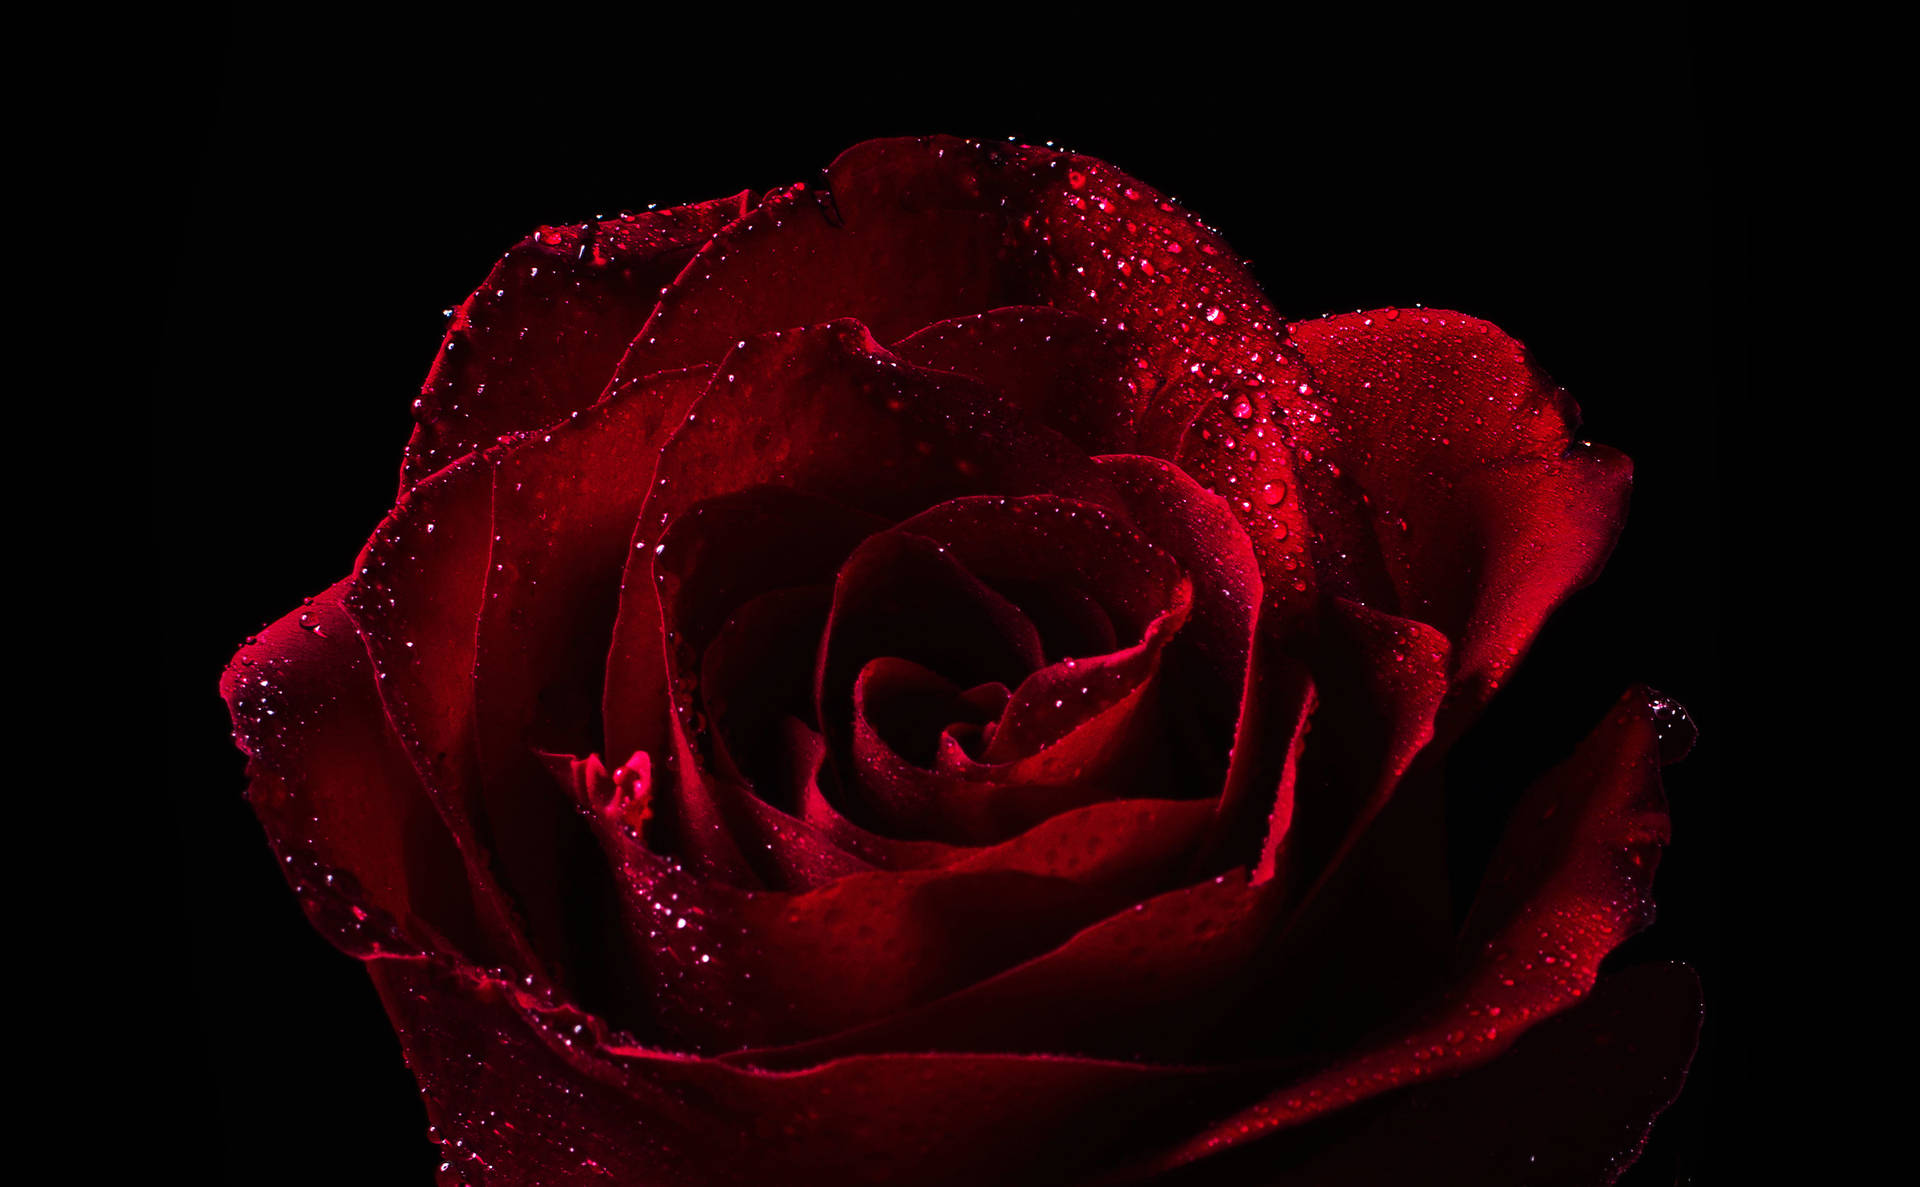 Rose With Water Droplets Wallpaper